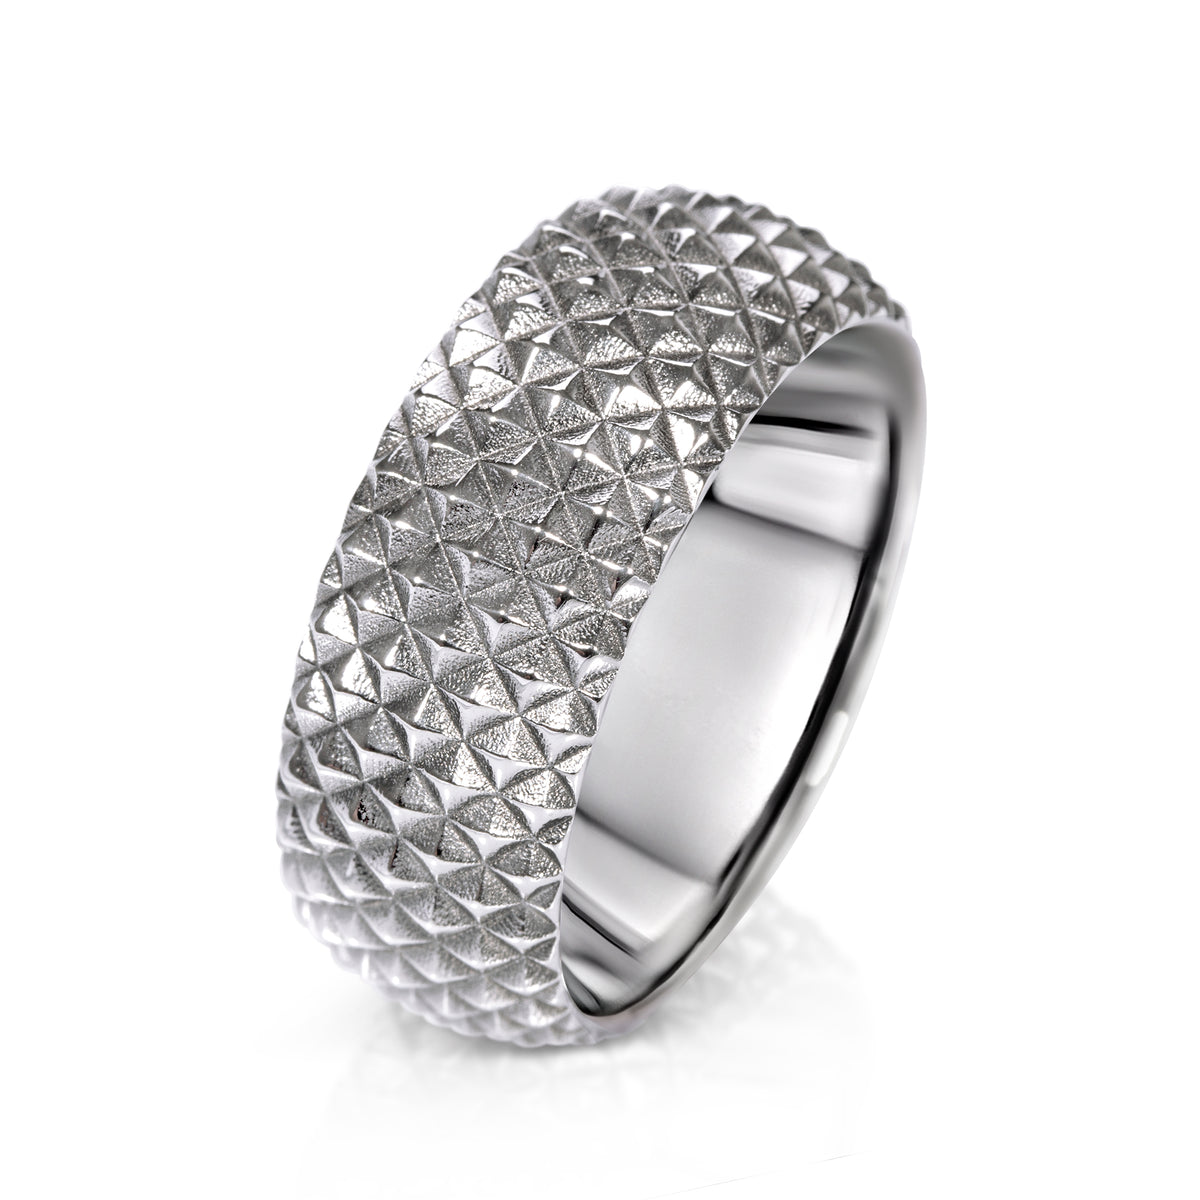 Magnificent textured and round shaped ring